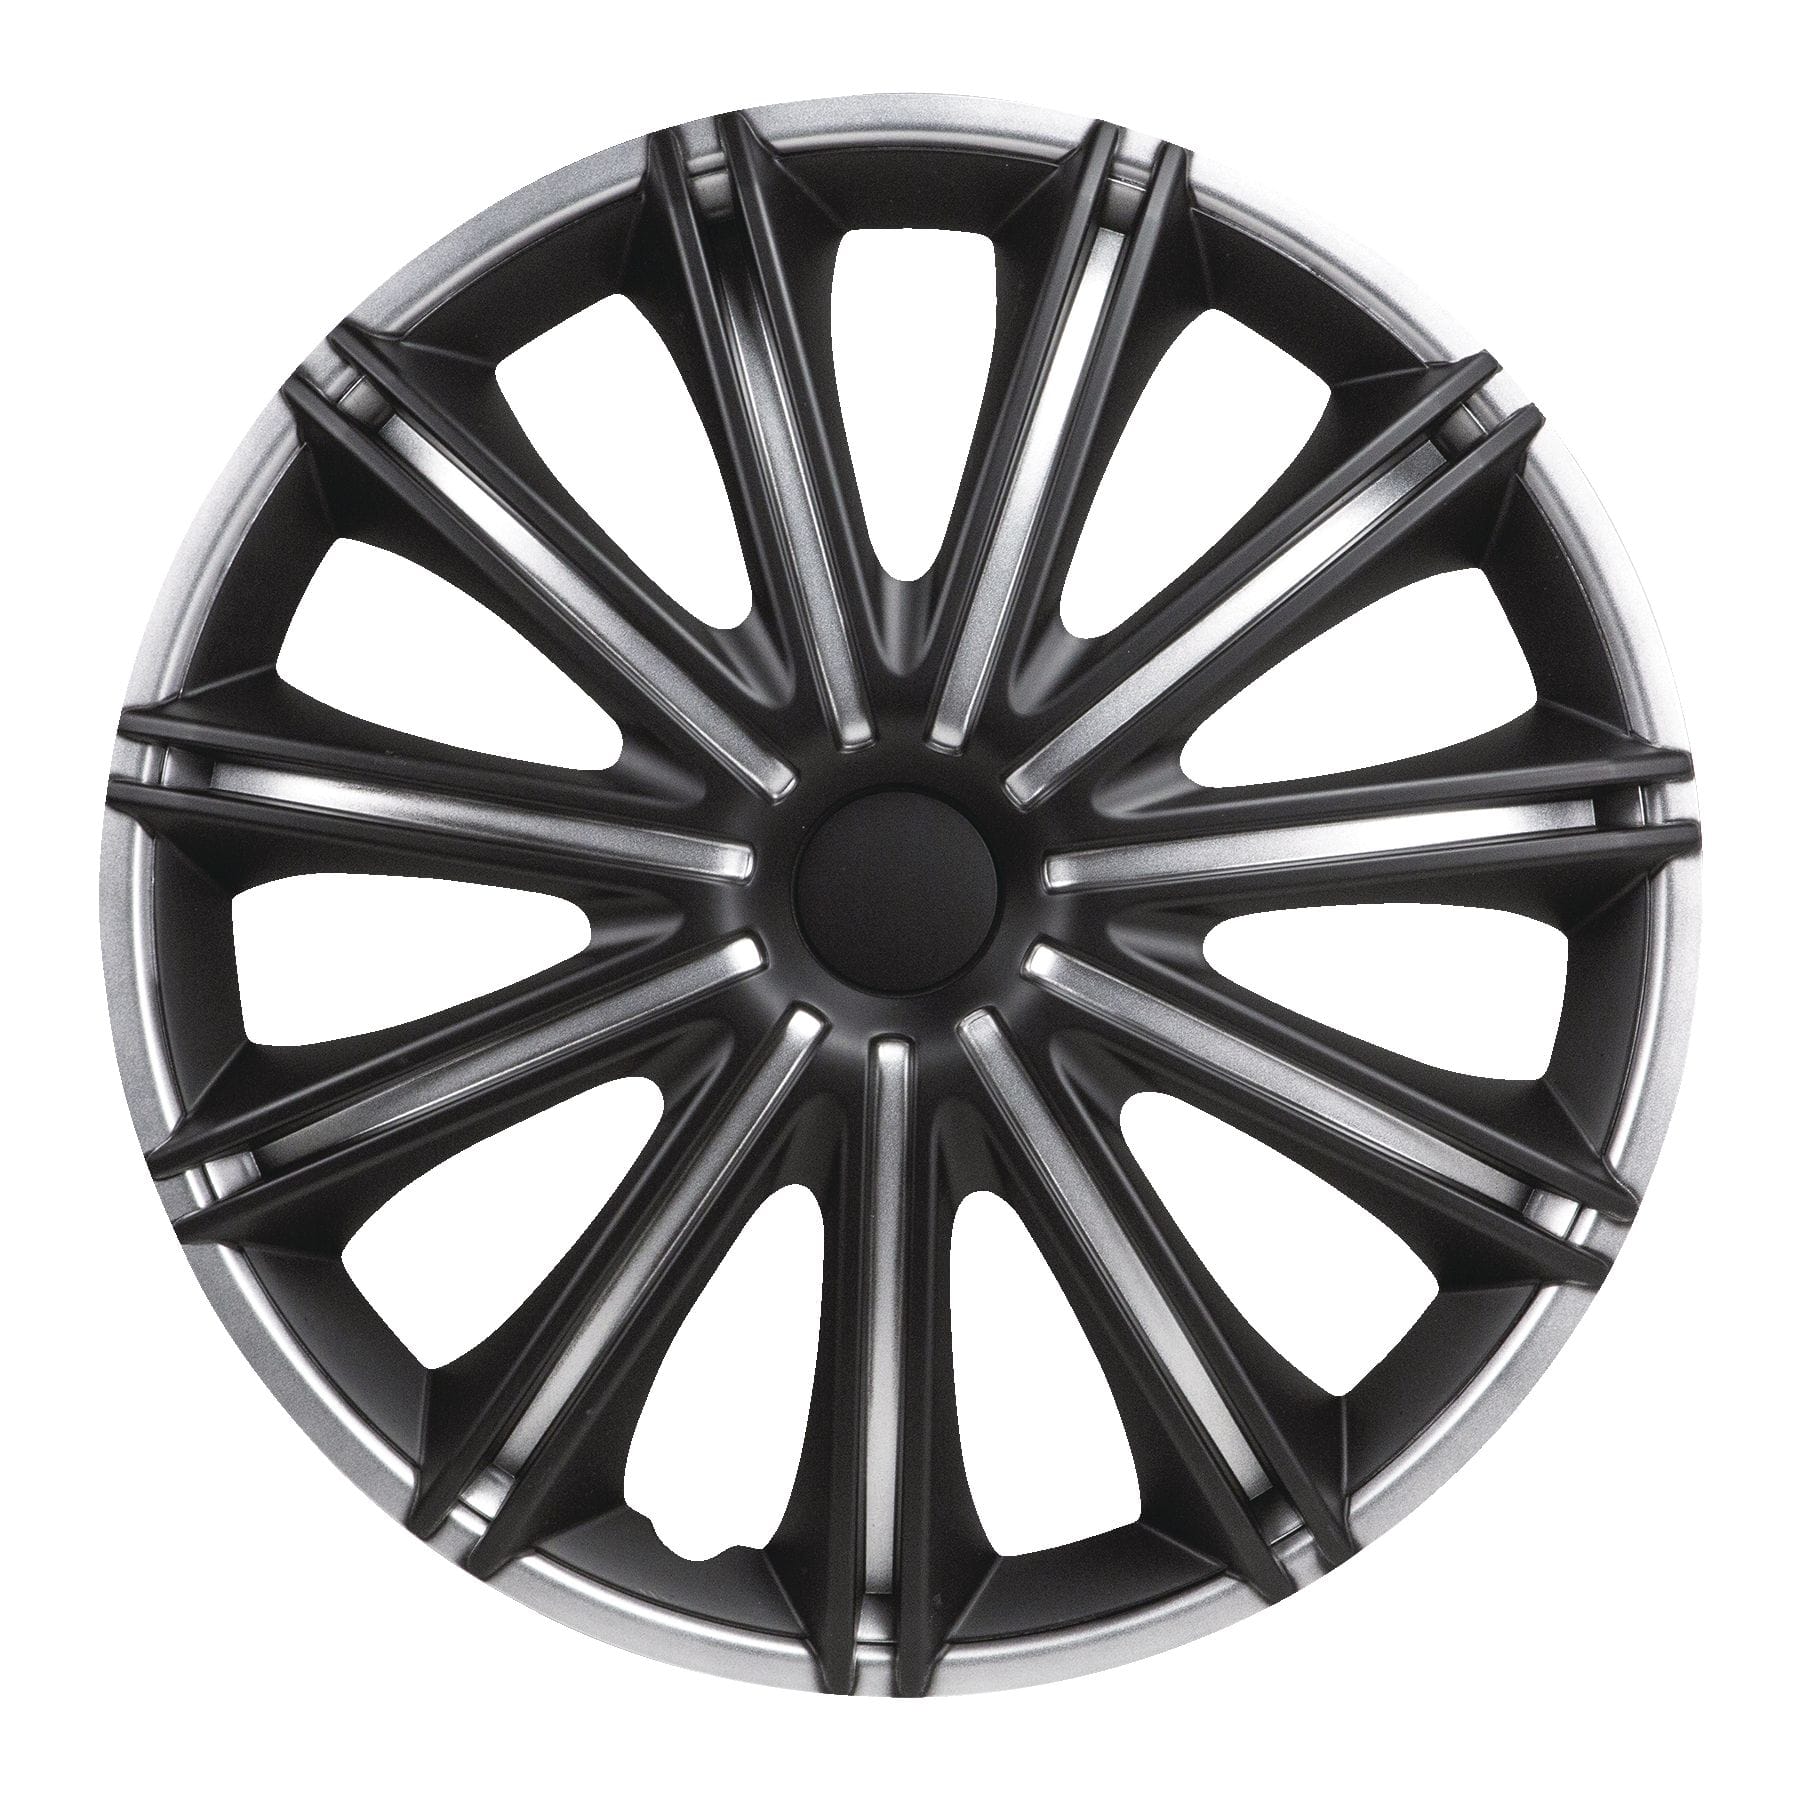 https://media-www.canadiantire.ca/product/automotive/tires/wheels-and-accessories/2410466/drivestyle-nero-silver-black-18-wheel-cover-5f2c898f-473a-46cb-9641-4178d21fd04f-jpgrendition.jpg